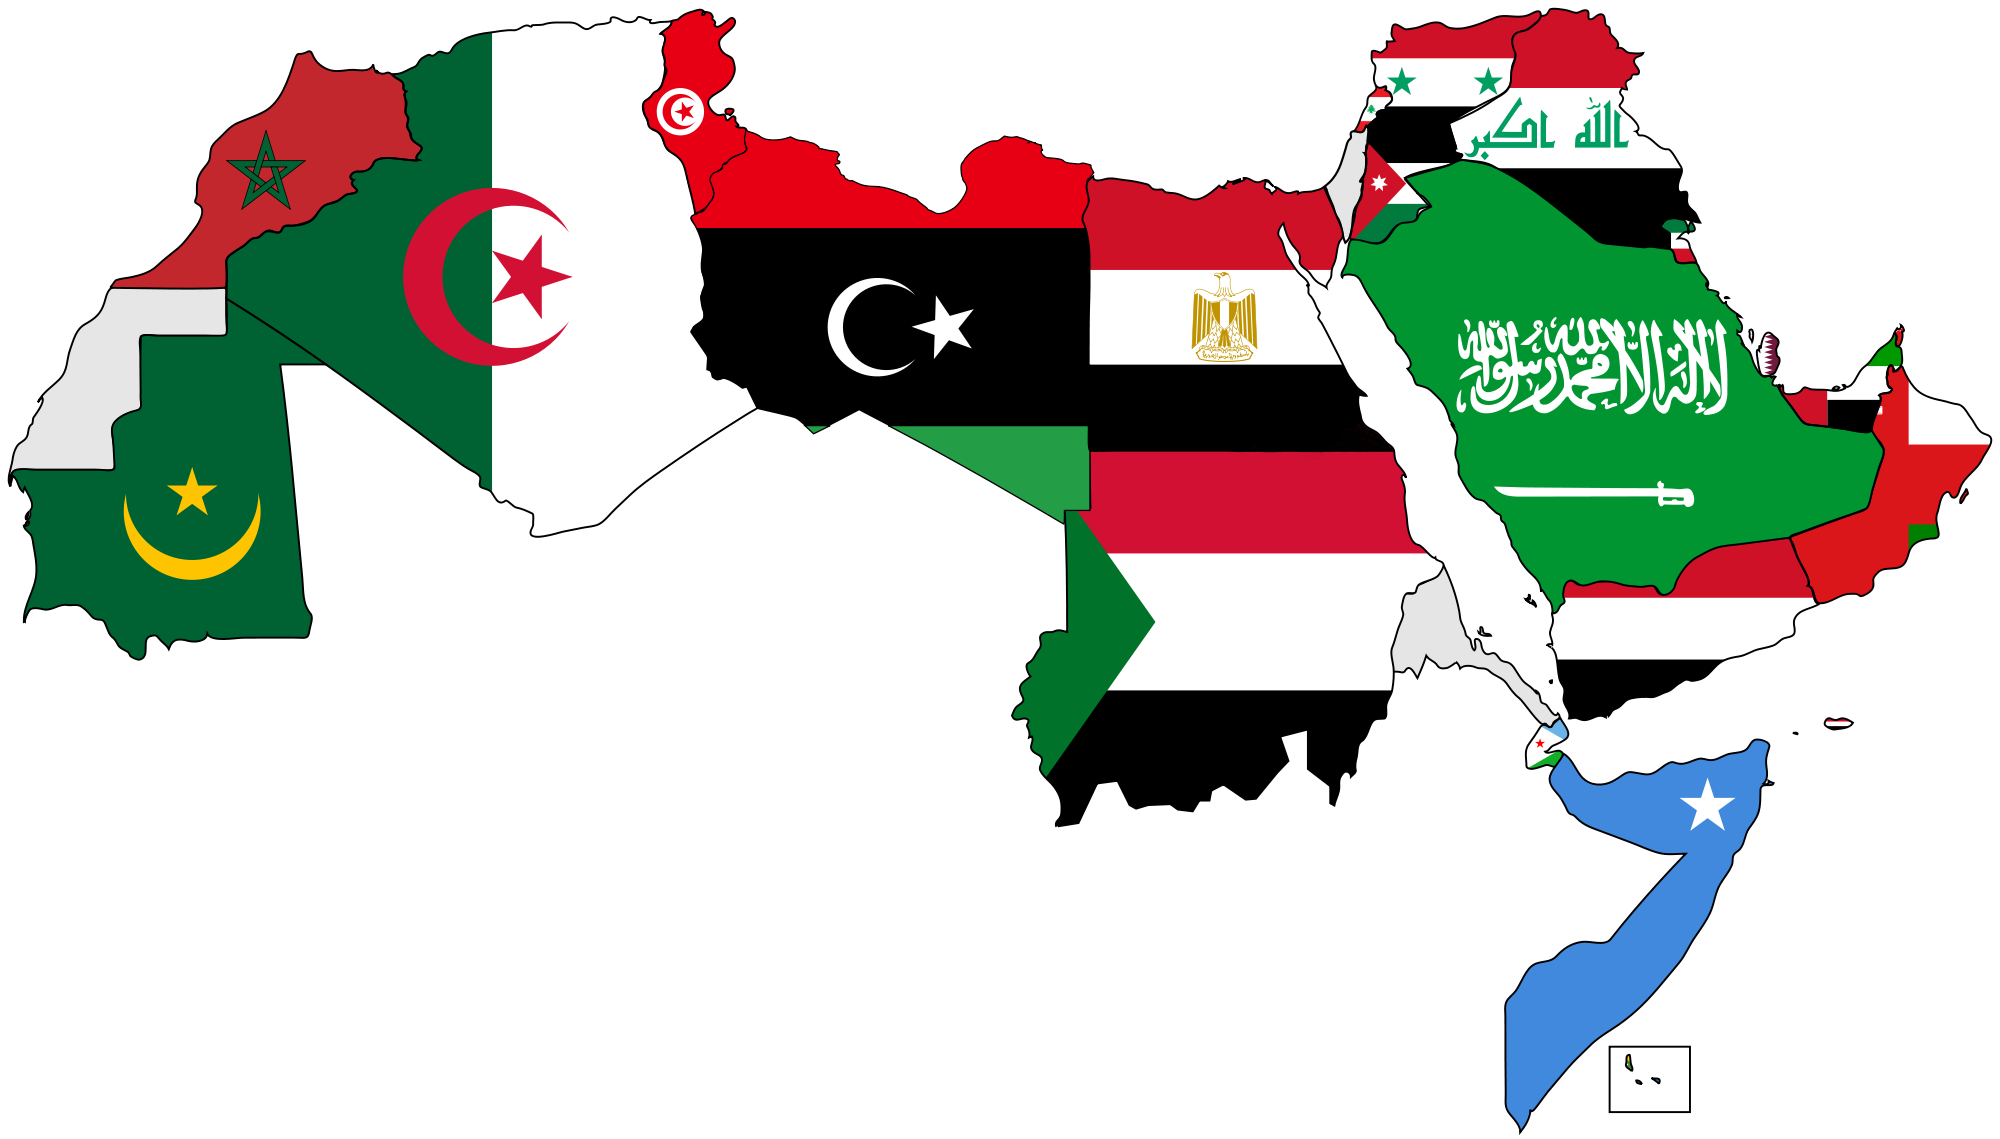 a_map_of_the_arab_world_with_flags.png